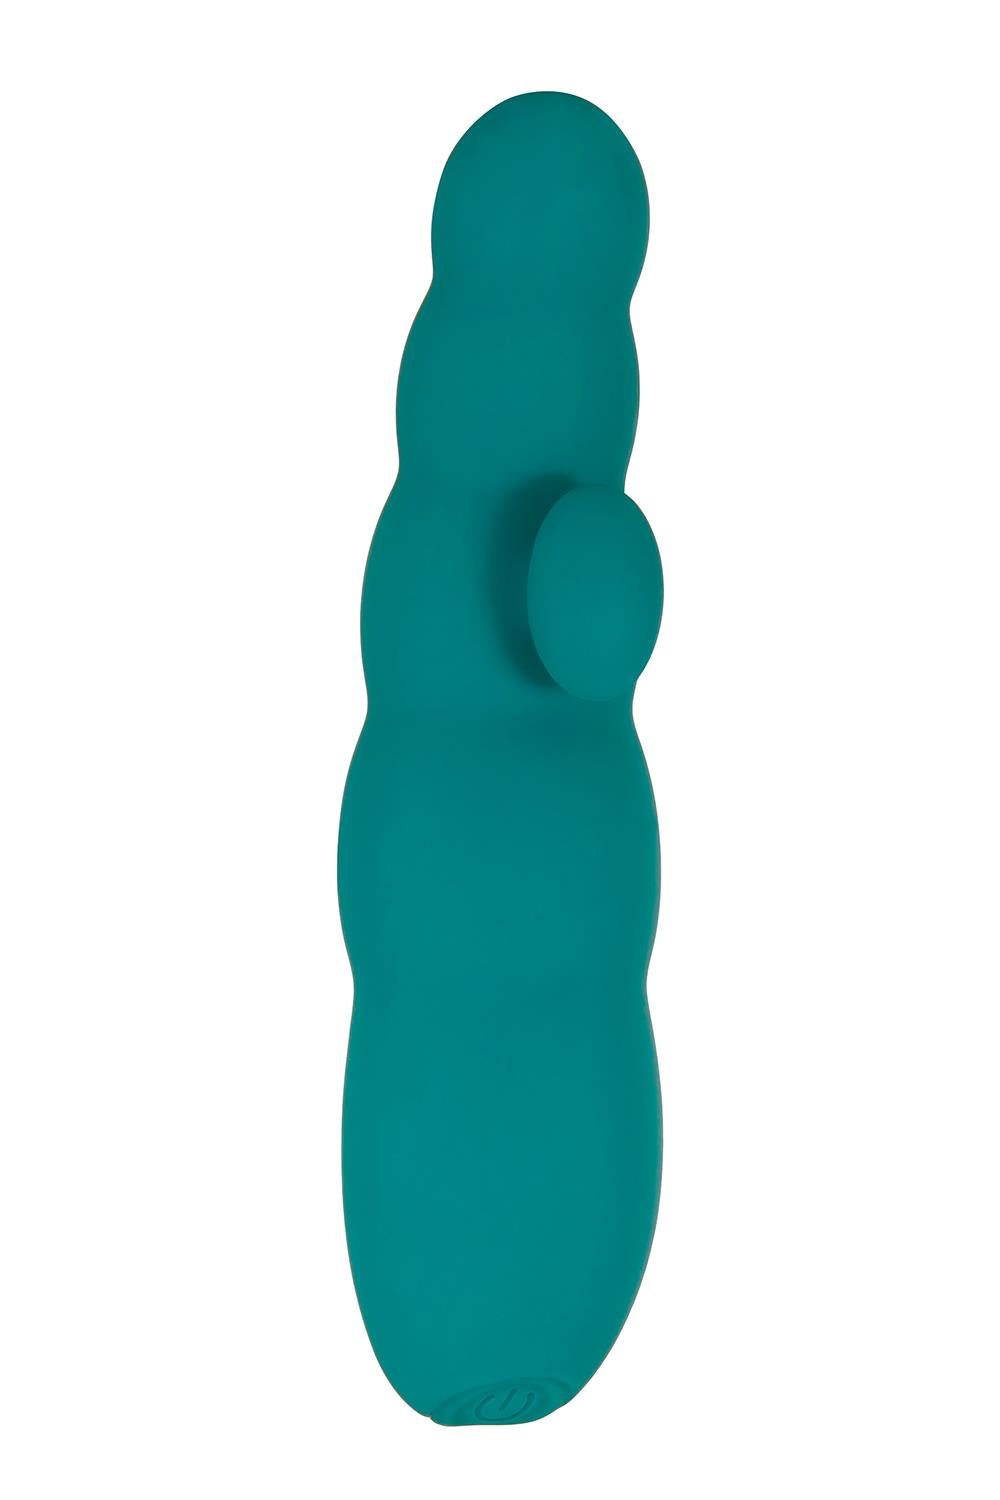 Evolved G-spot Perfection